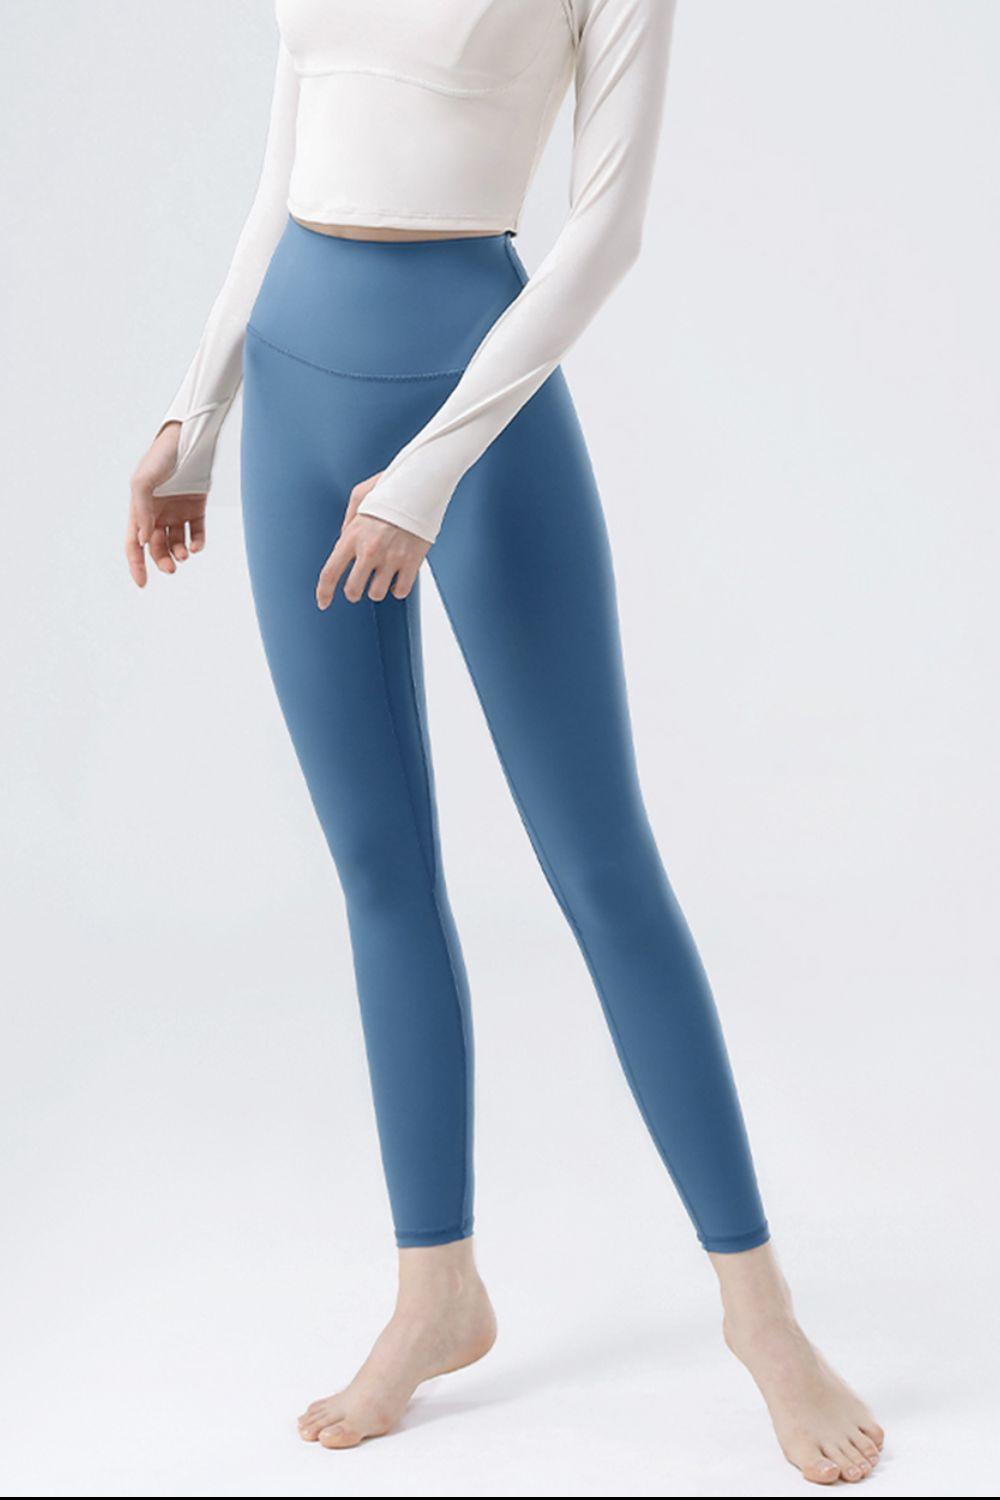 a woman in a white top and blue leggings